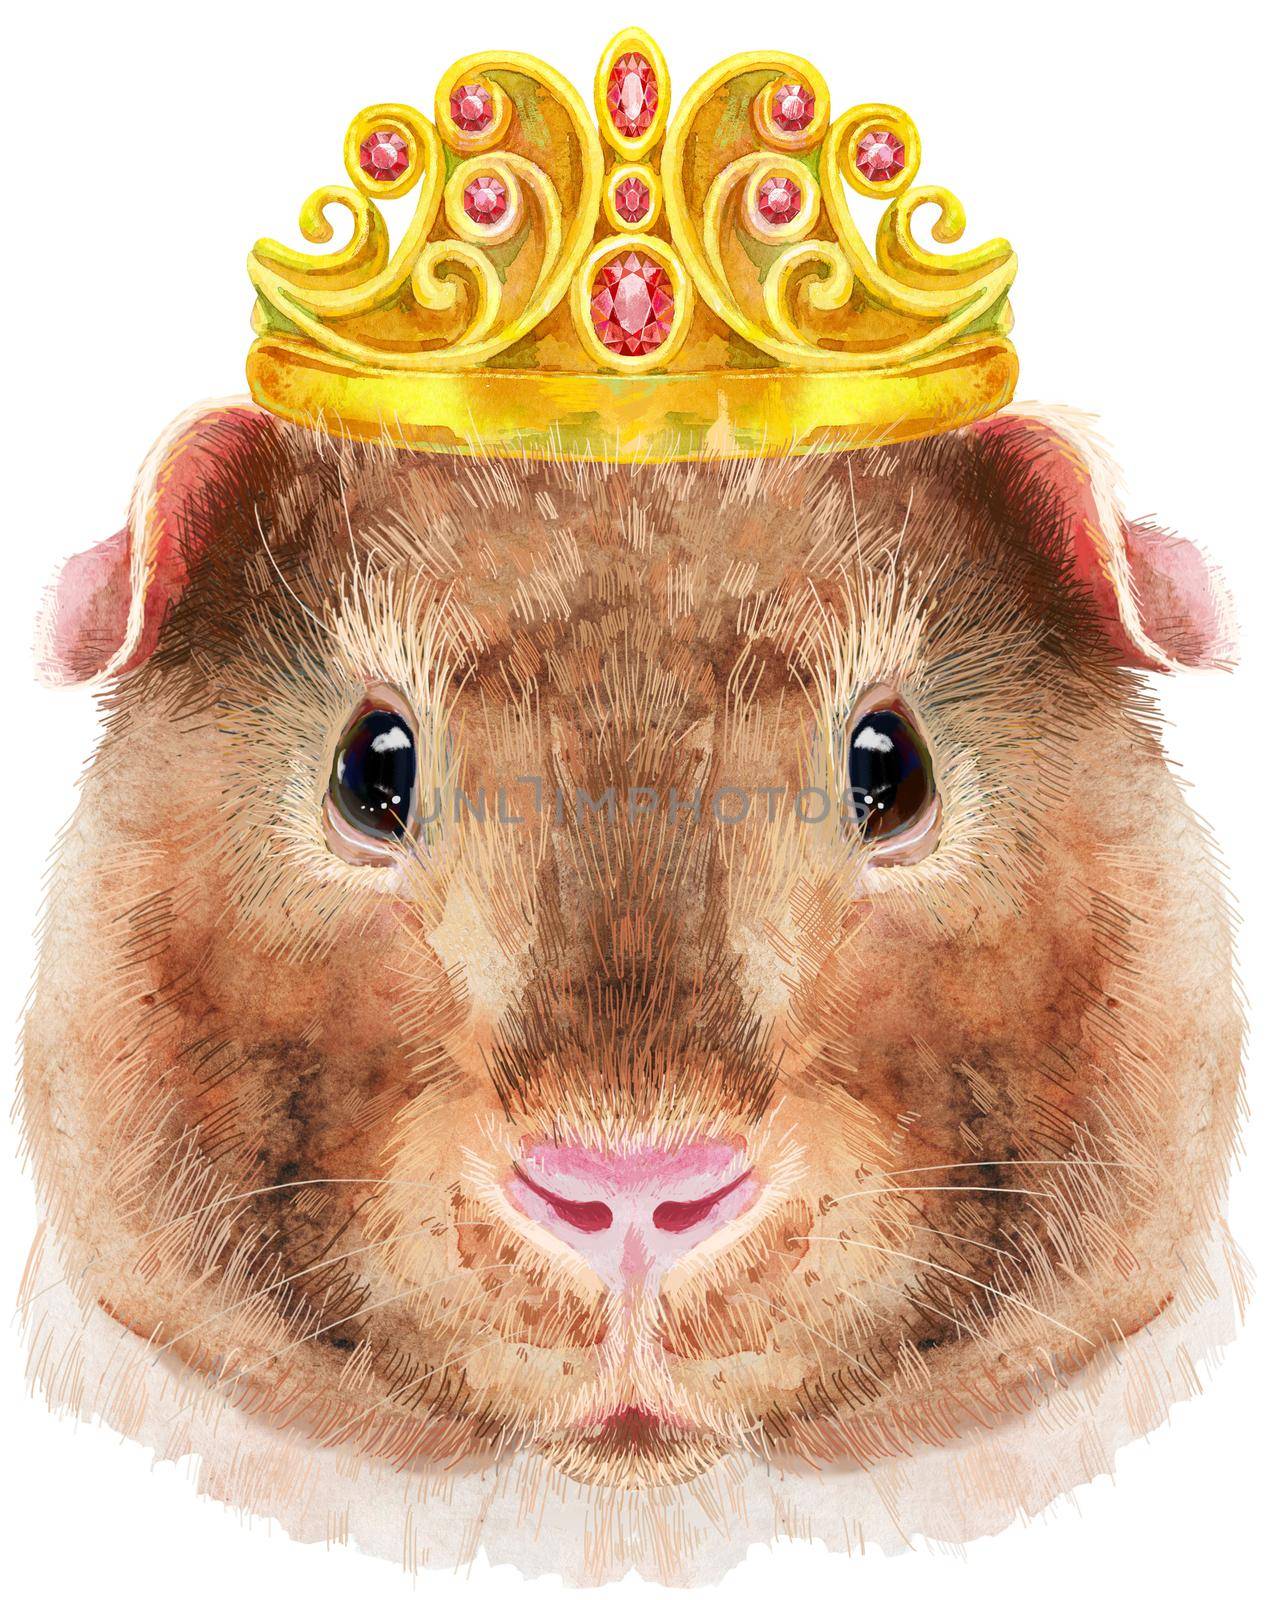 Watercolor portrait of Teddy guinea pig with golden crown on white background by NataOmsk